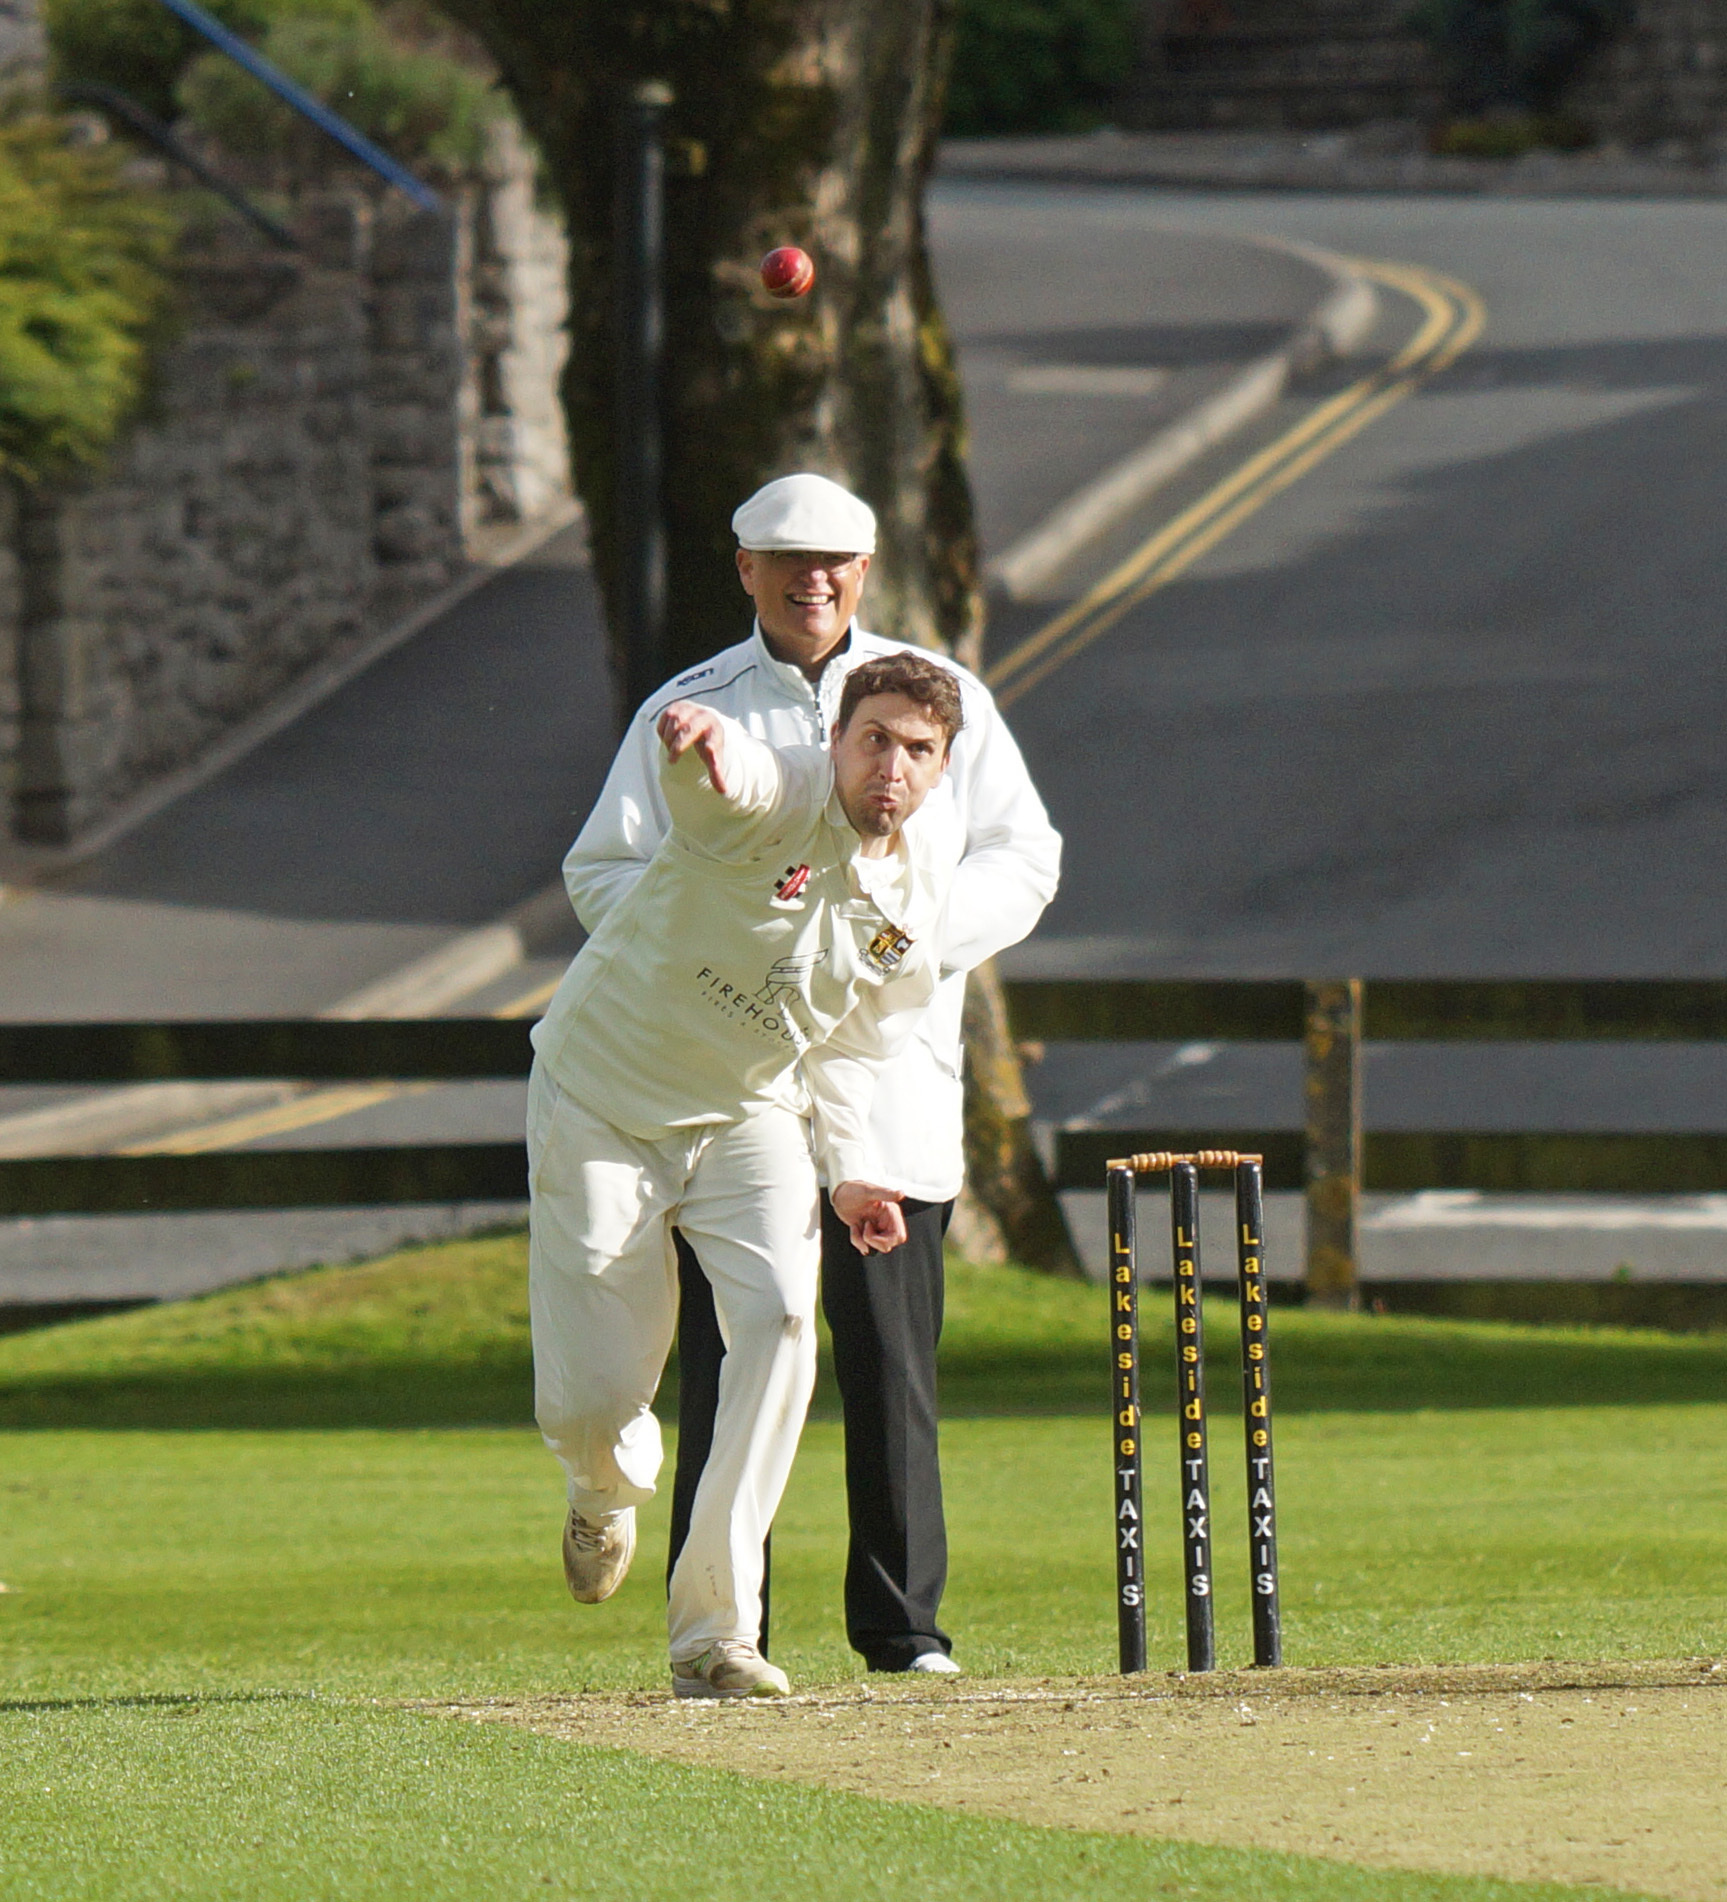 BOWLING: Ritchie Forsyth bowling (Report and photographs by Richard Edmondson)